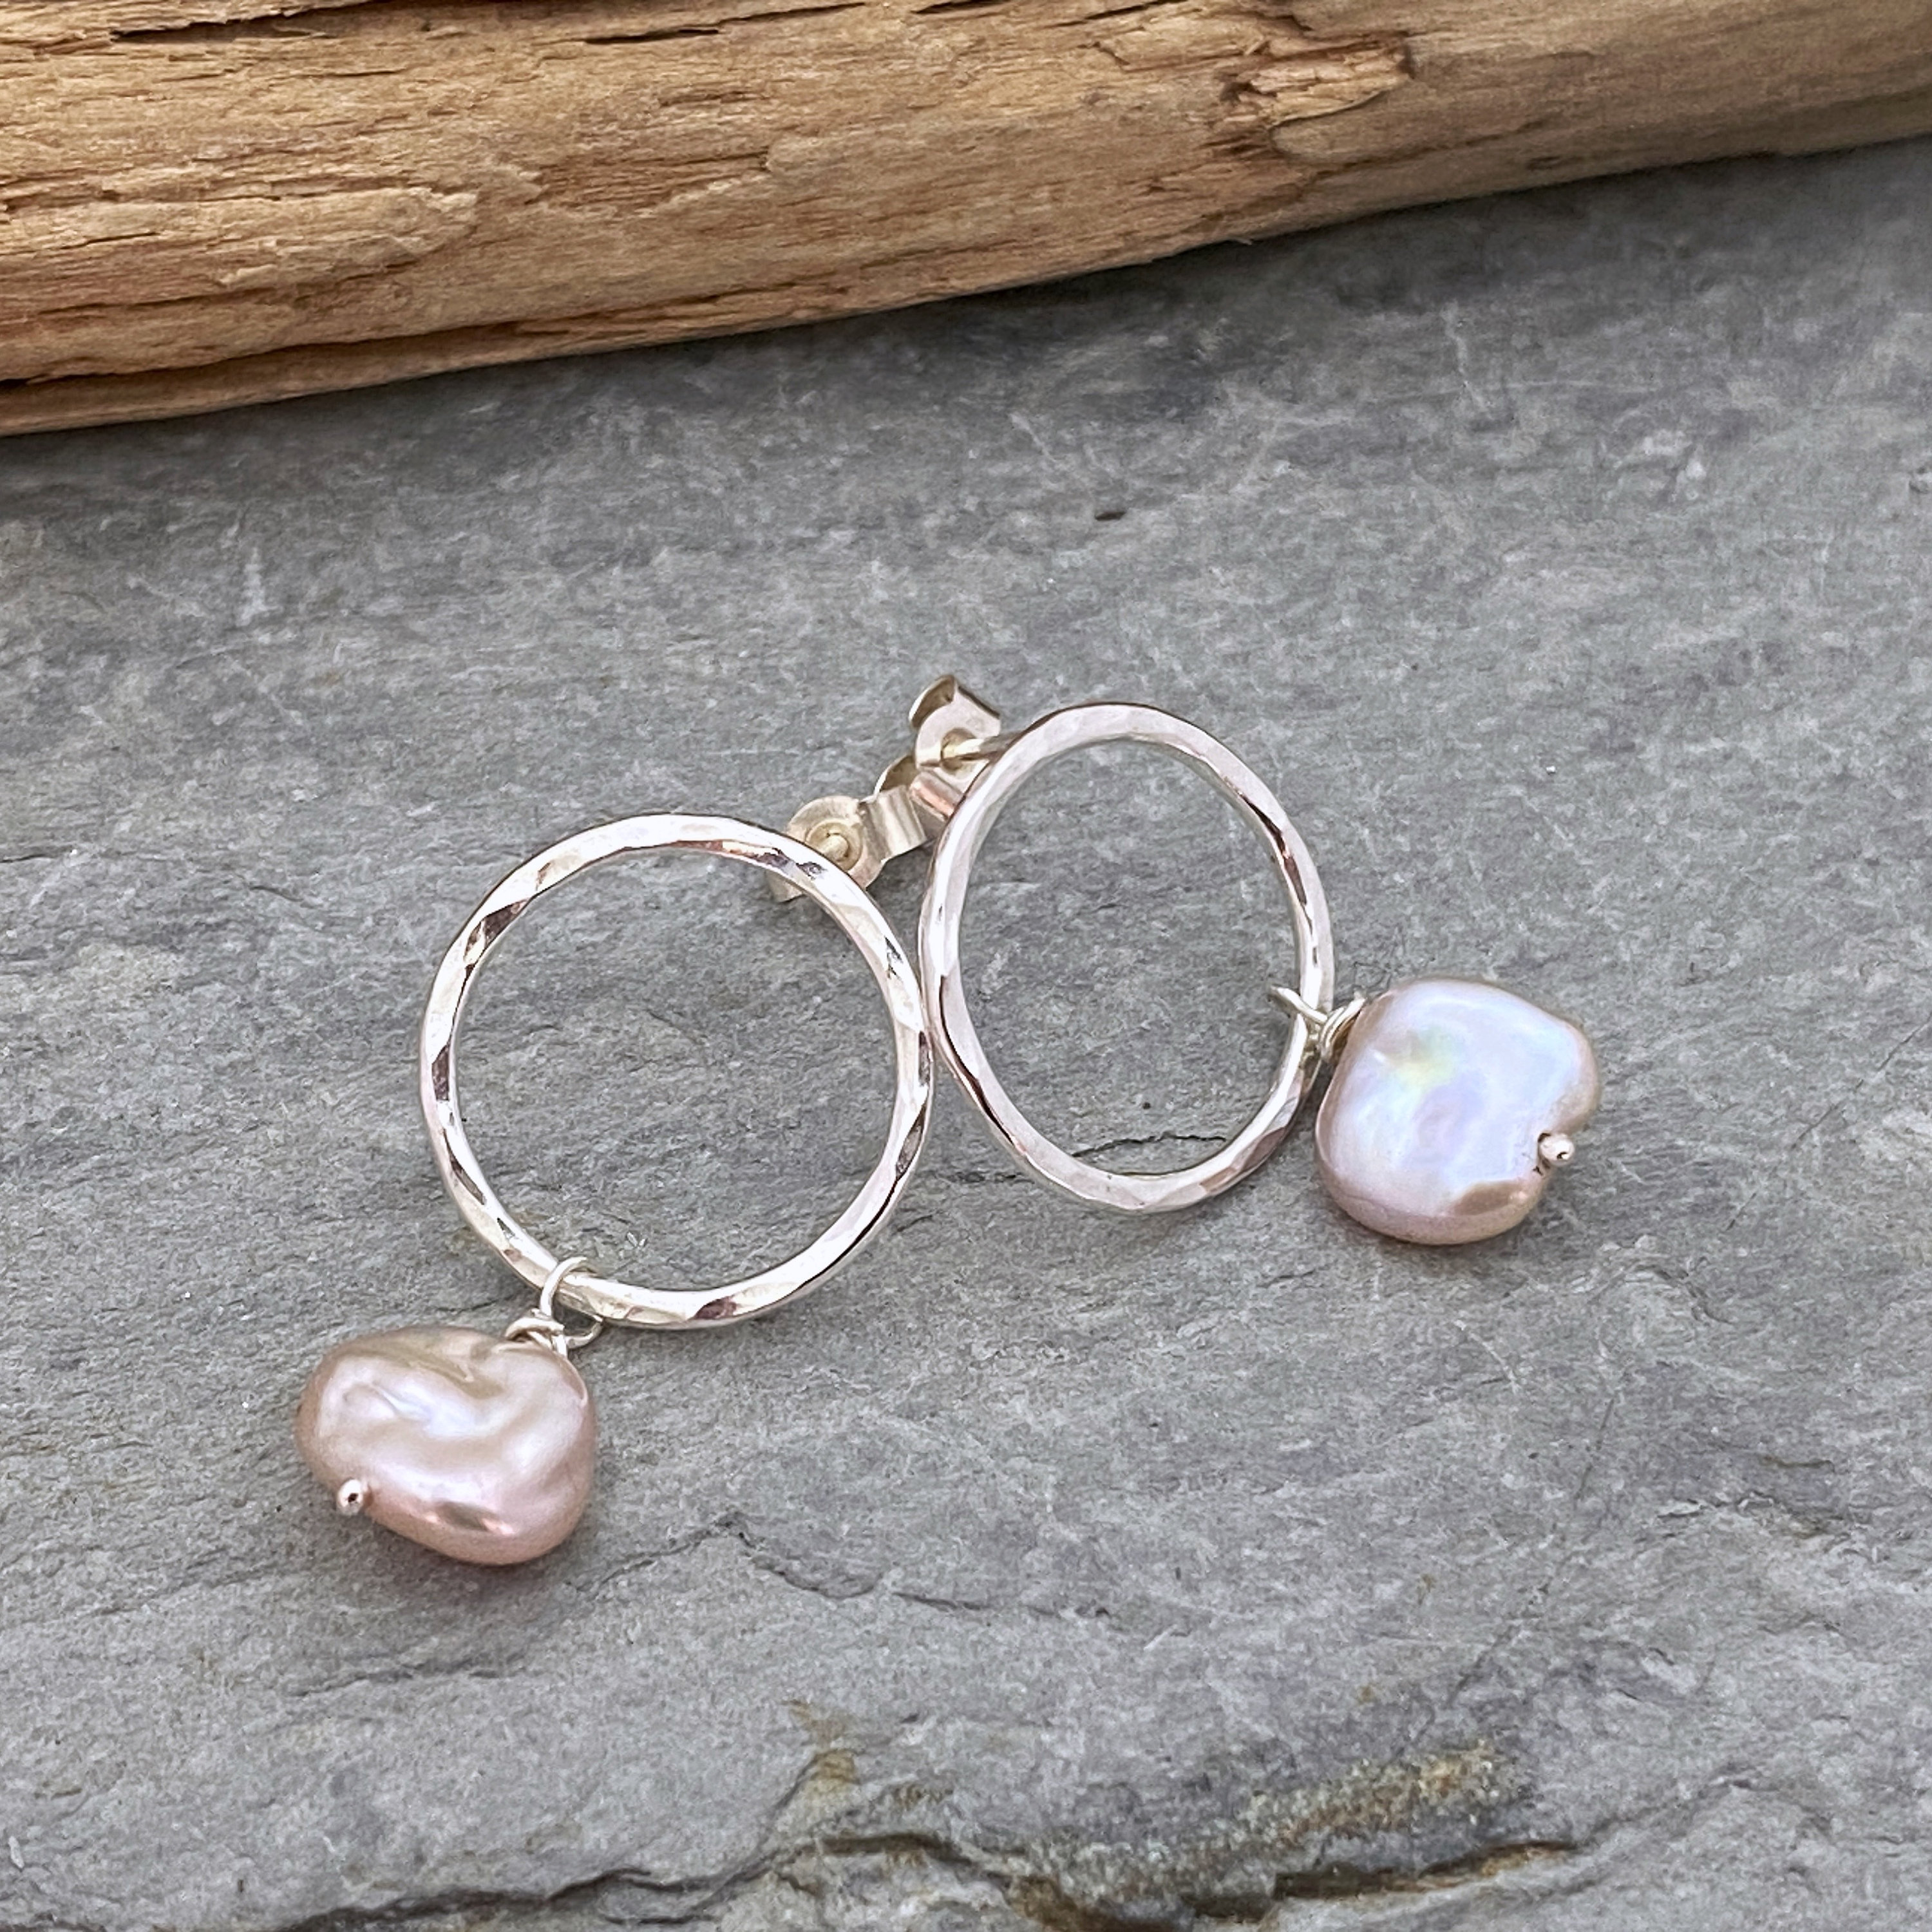 Open Circle Stud Earrings With Pink Keshi Pearl Drops, Hammered Silver Rings A Wire Wrapped Dangle